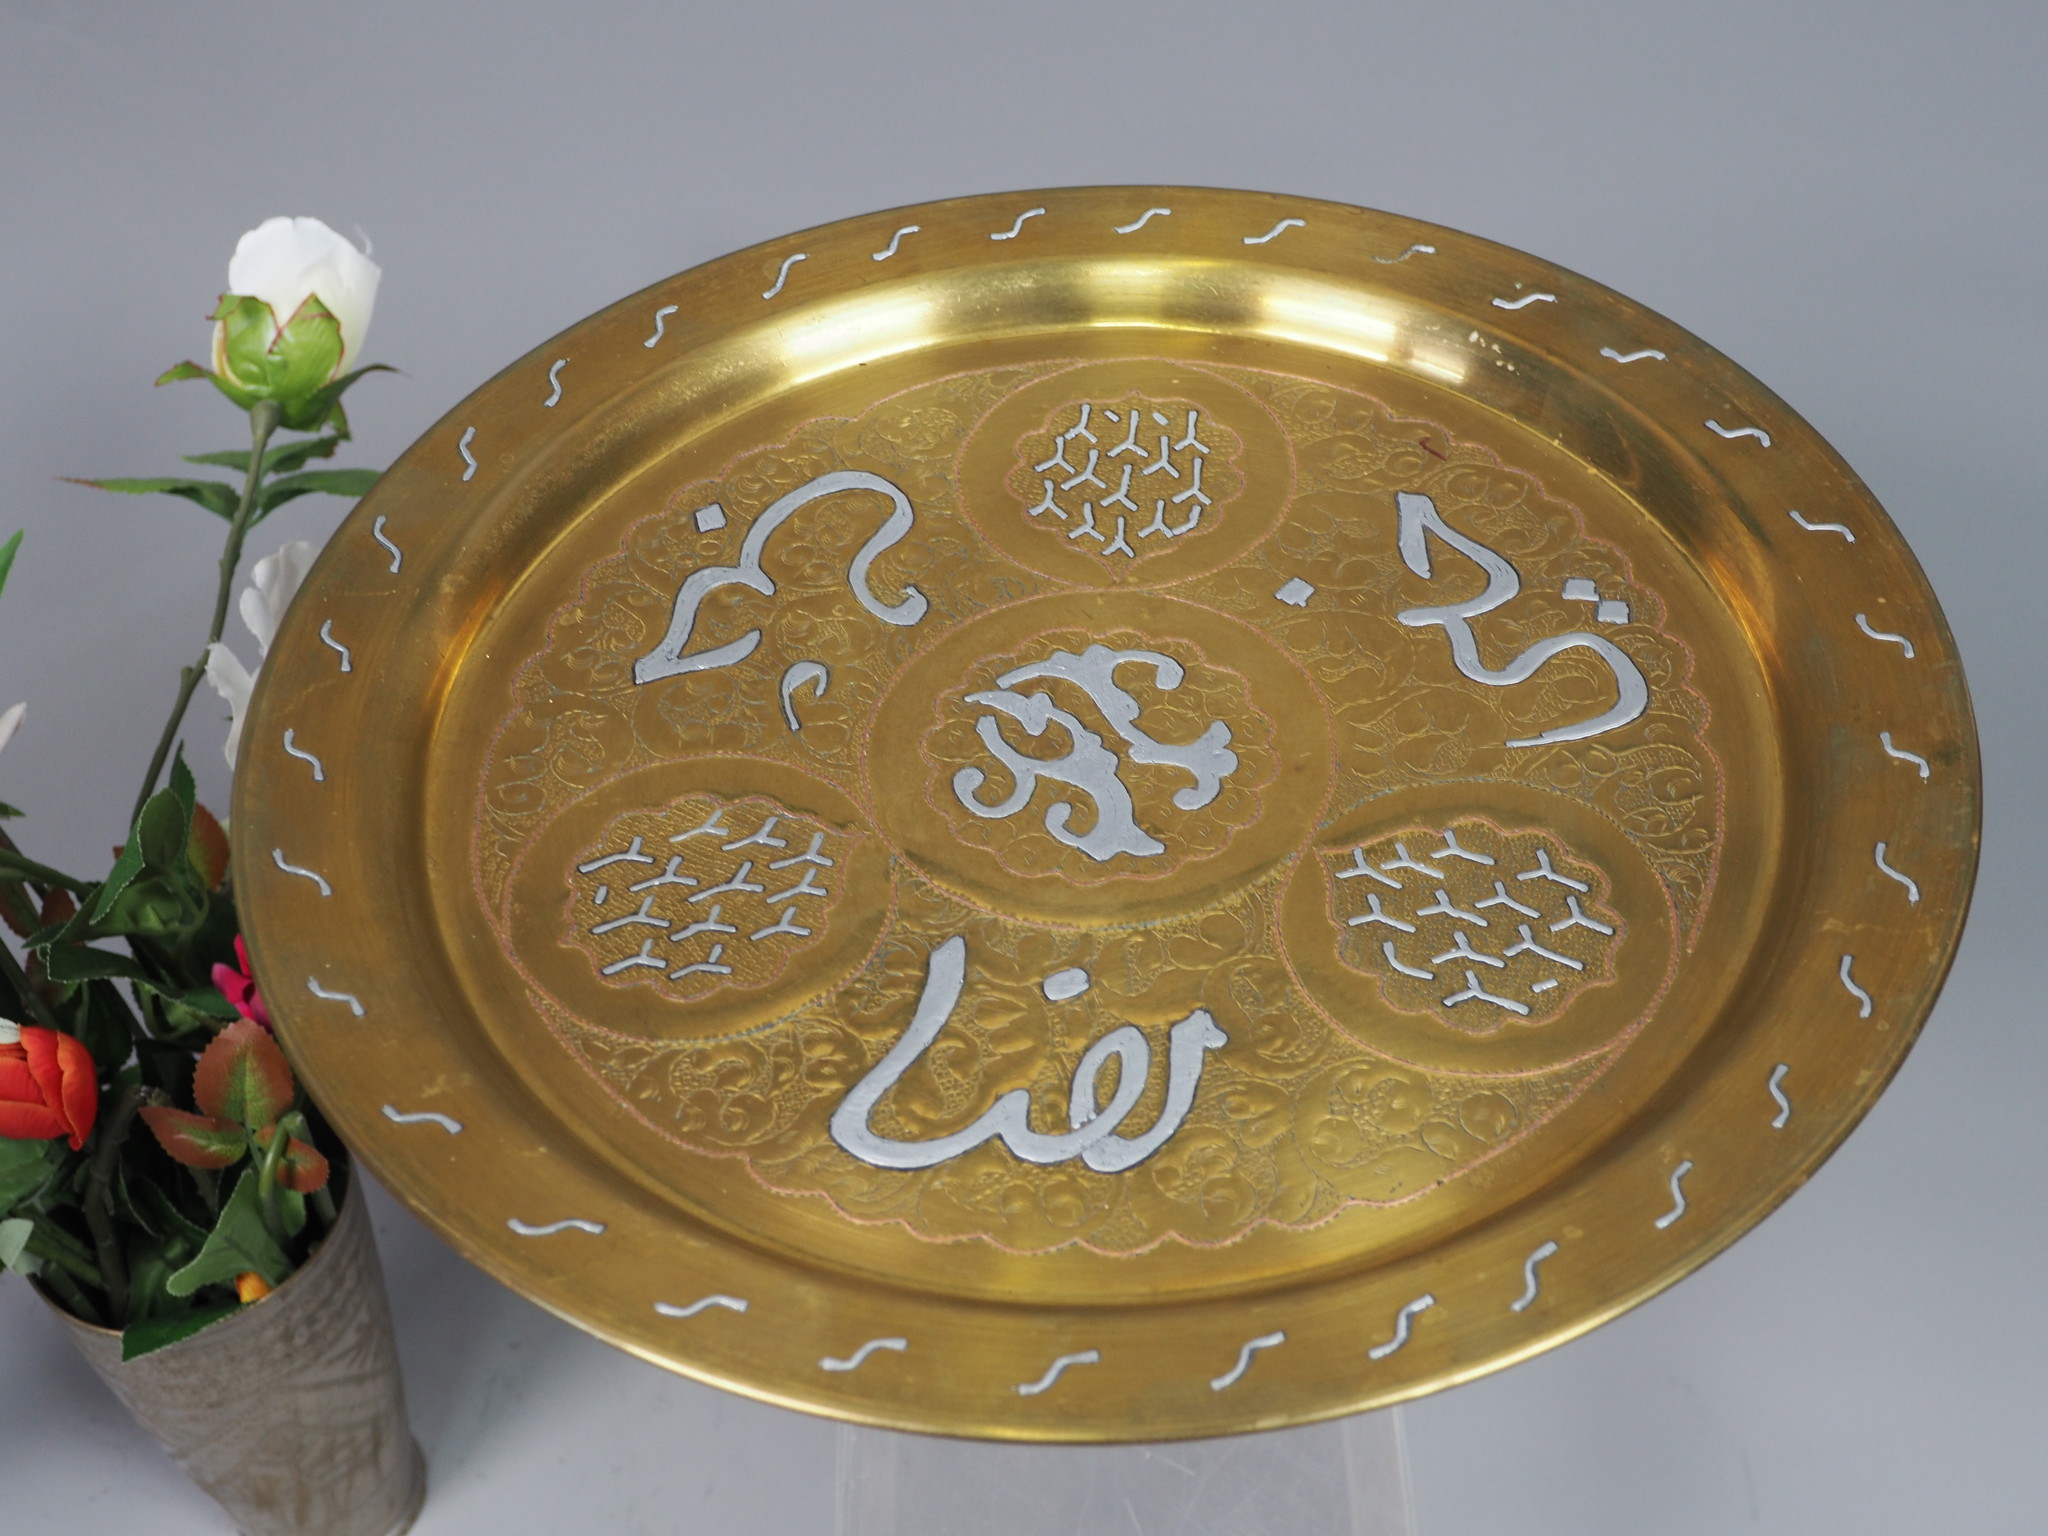 34 cm  Antique ottoman orient Islamic Hammer Engraved Brass Tray Syria Morocco, Egypt Mamluk Cairoware with arabic calligraphy K29